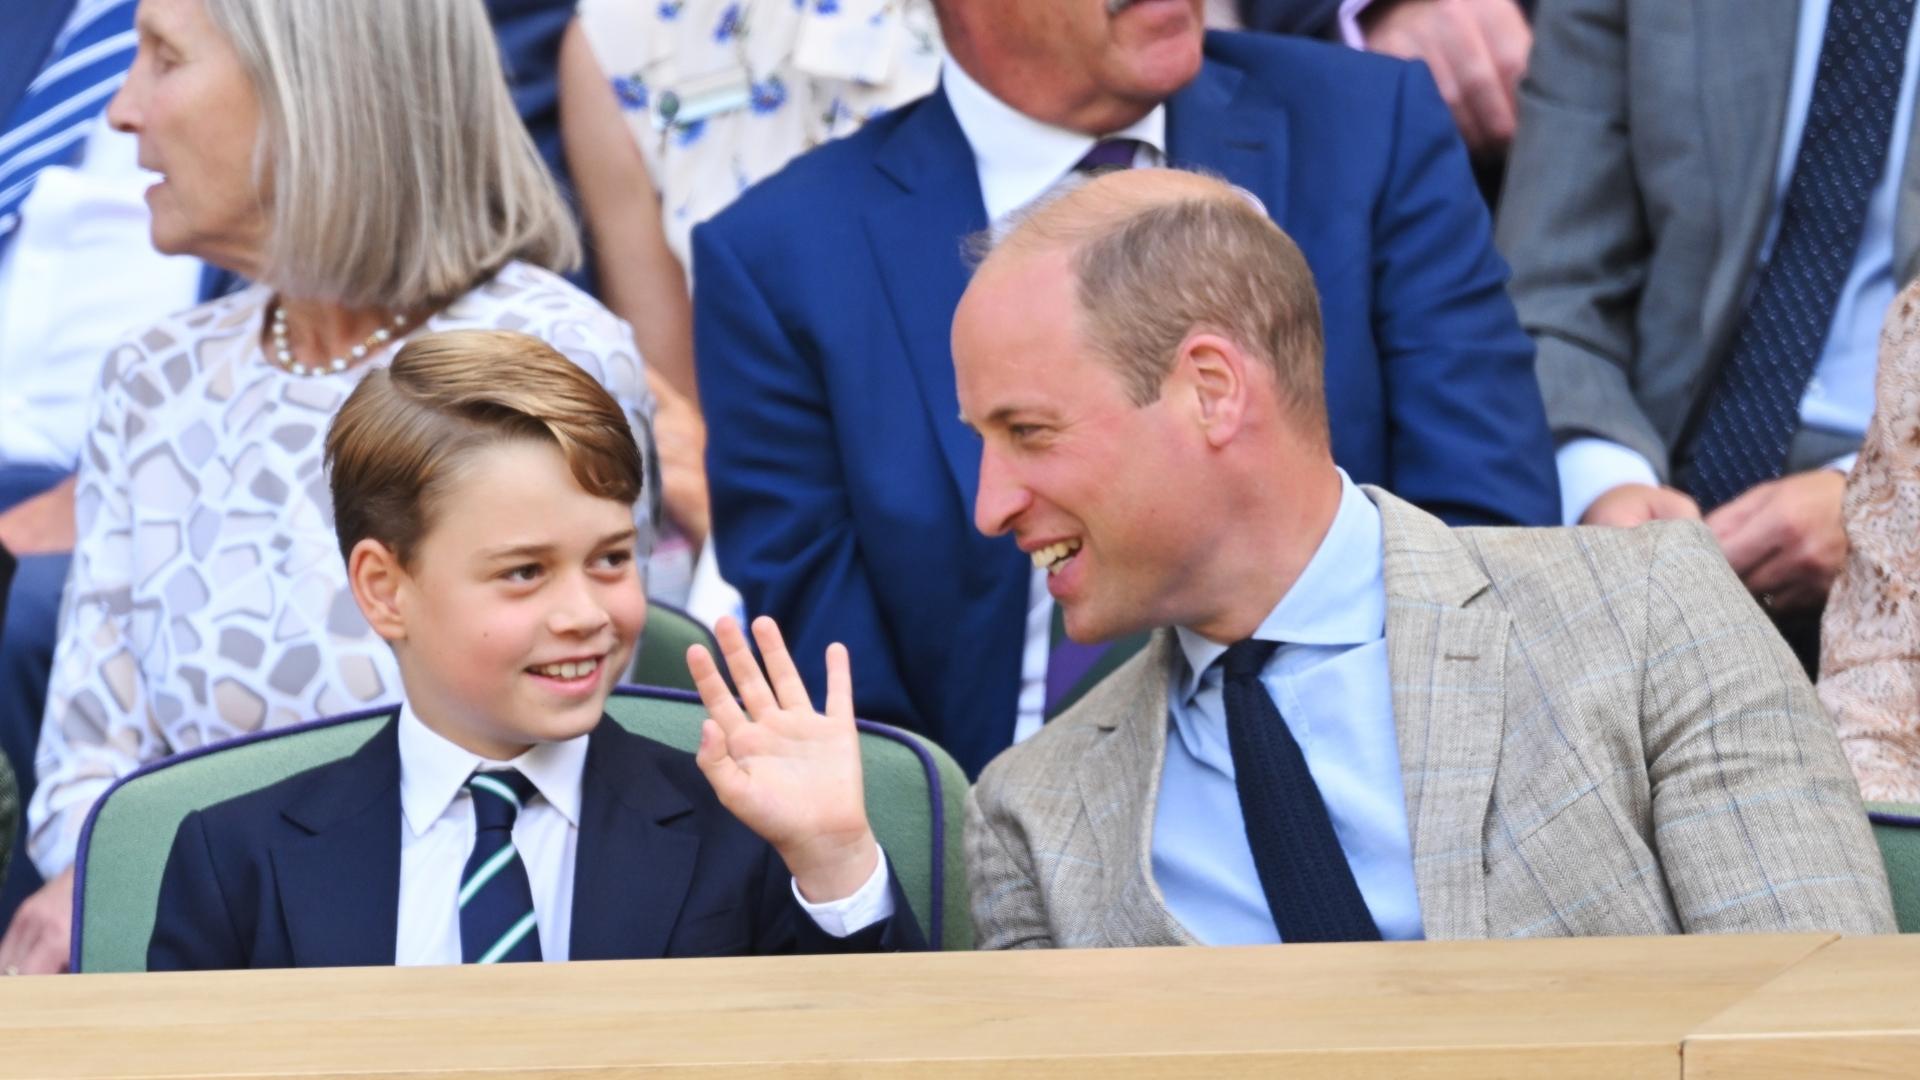 Kate Middleton break royal tradition George - Prince George and Prince William attend The Wimbledon Men's Singles Final the All England Lawn Tennis and Croquet Club on July 10, 2022 in London, England